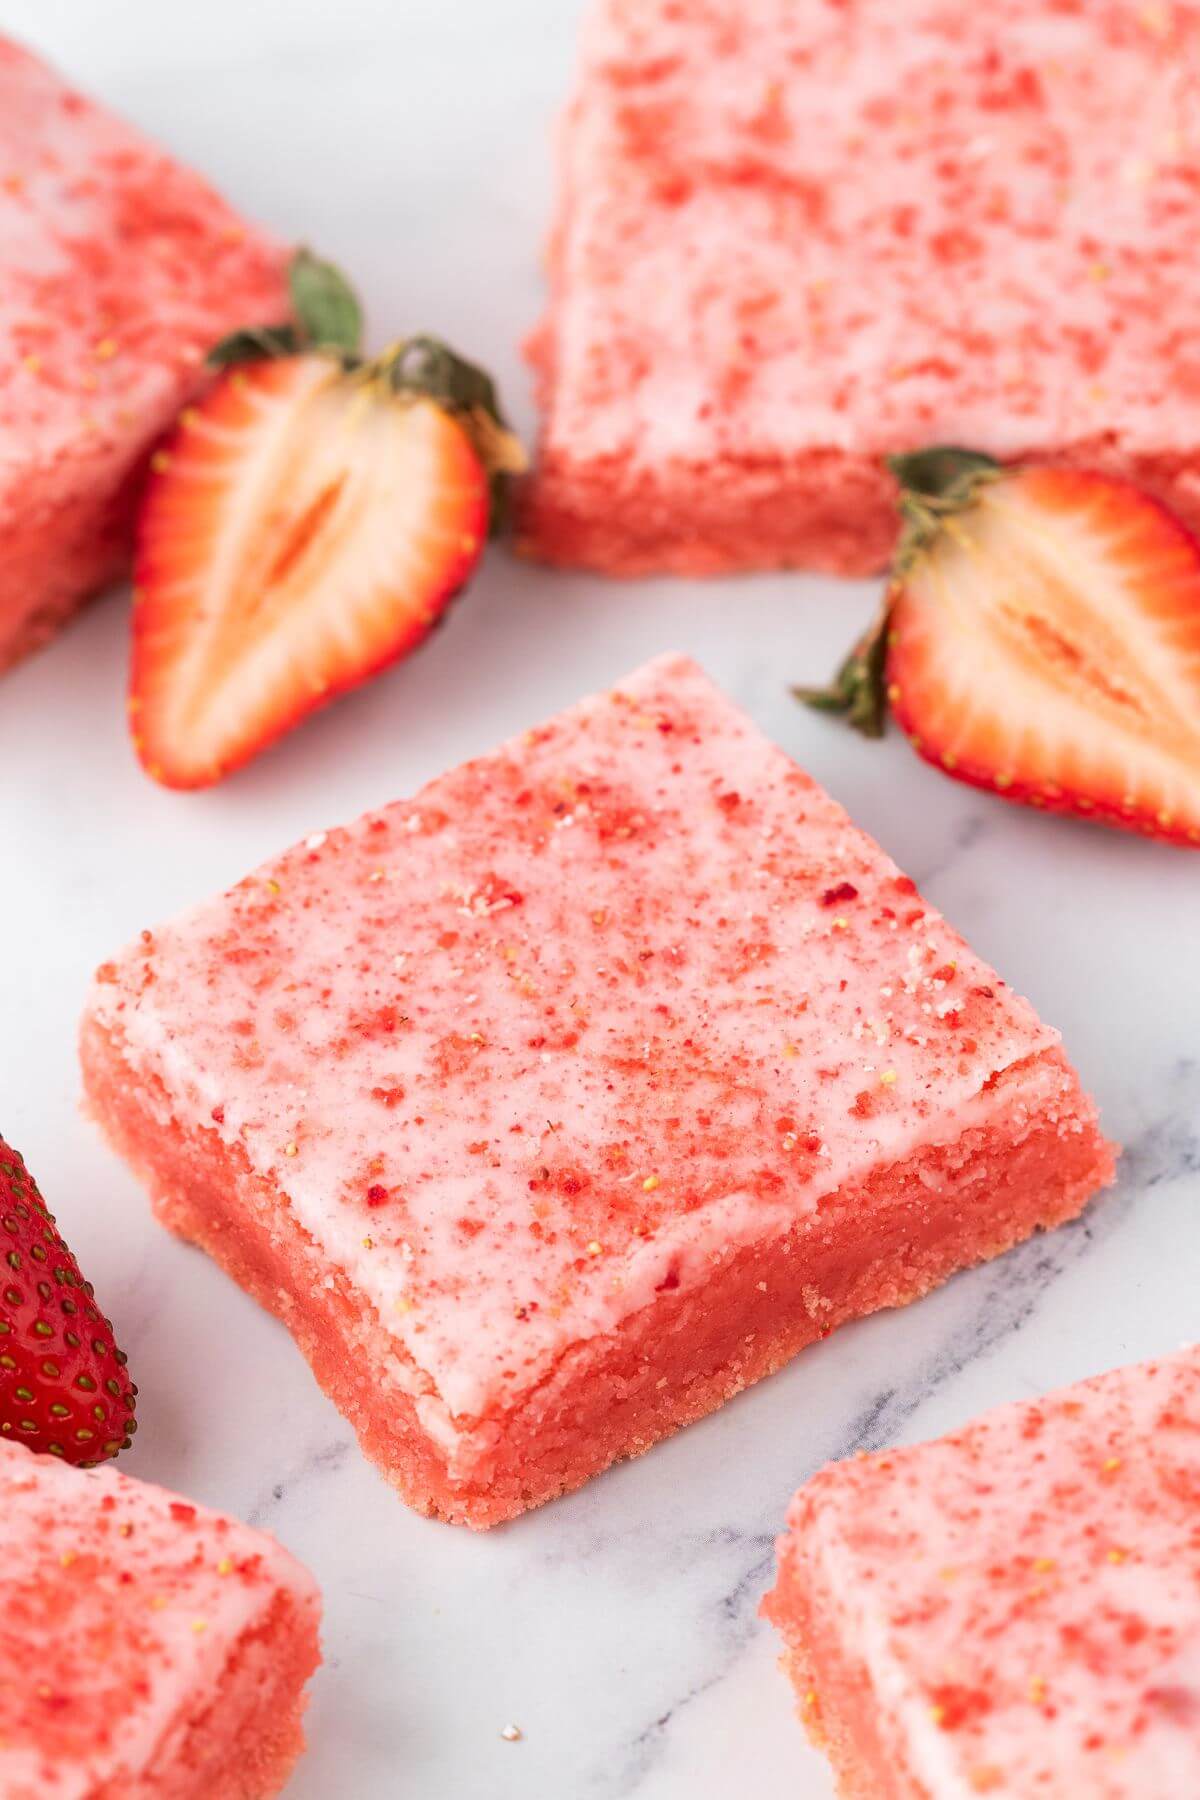 Strawberry pink brownies are scattered amongst strawberry halves on the counter.